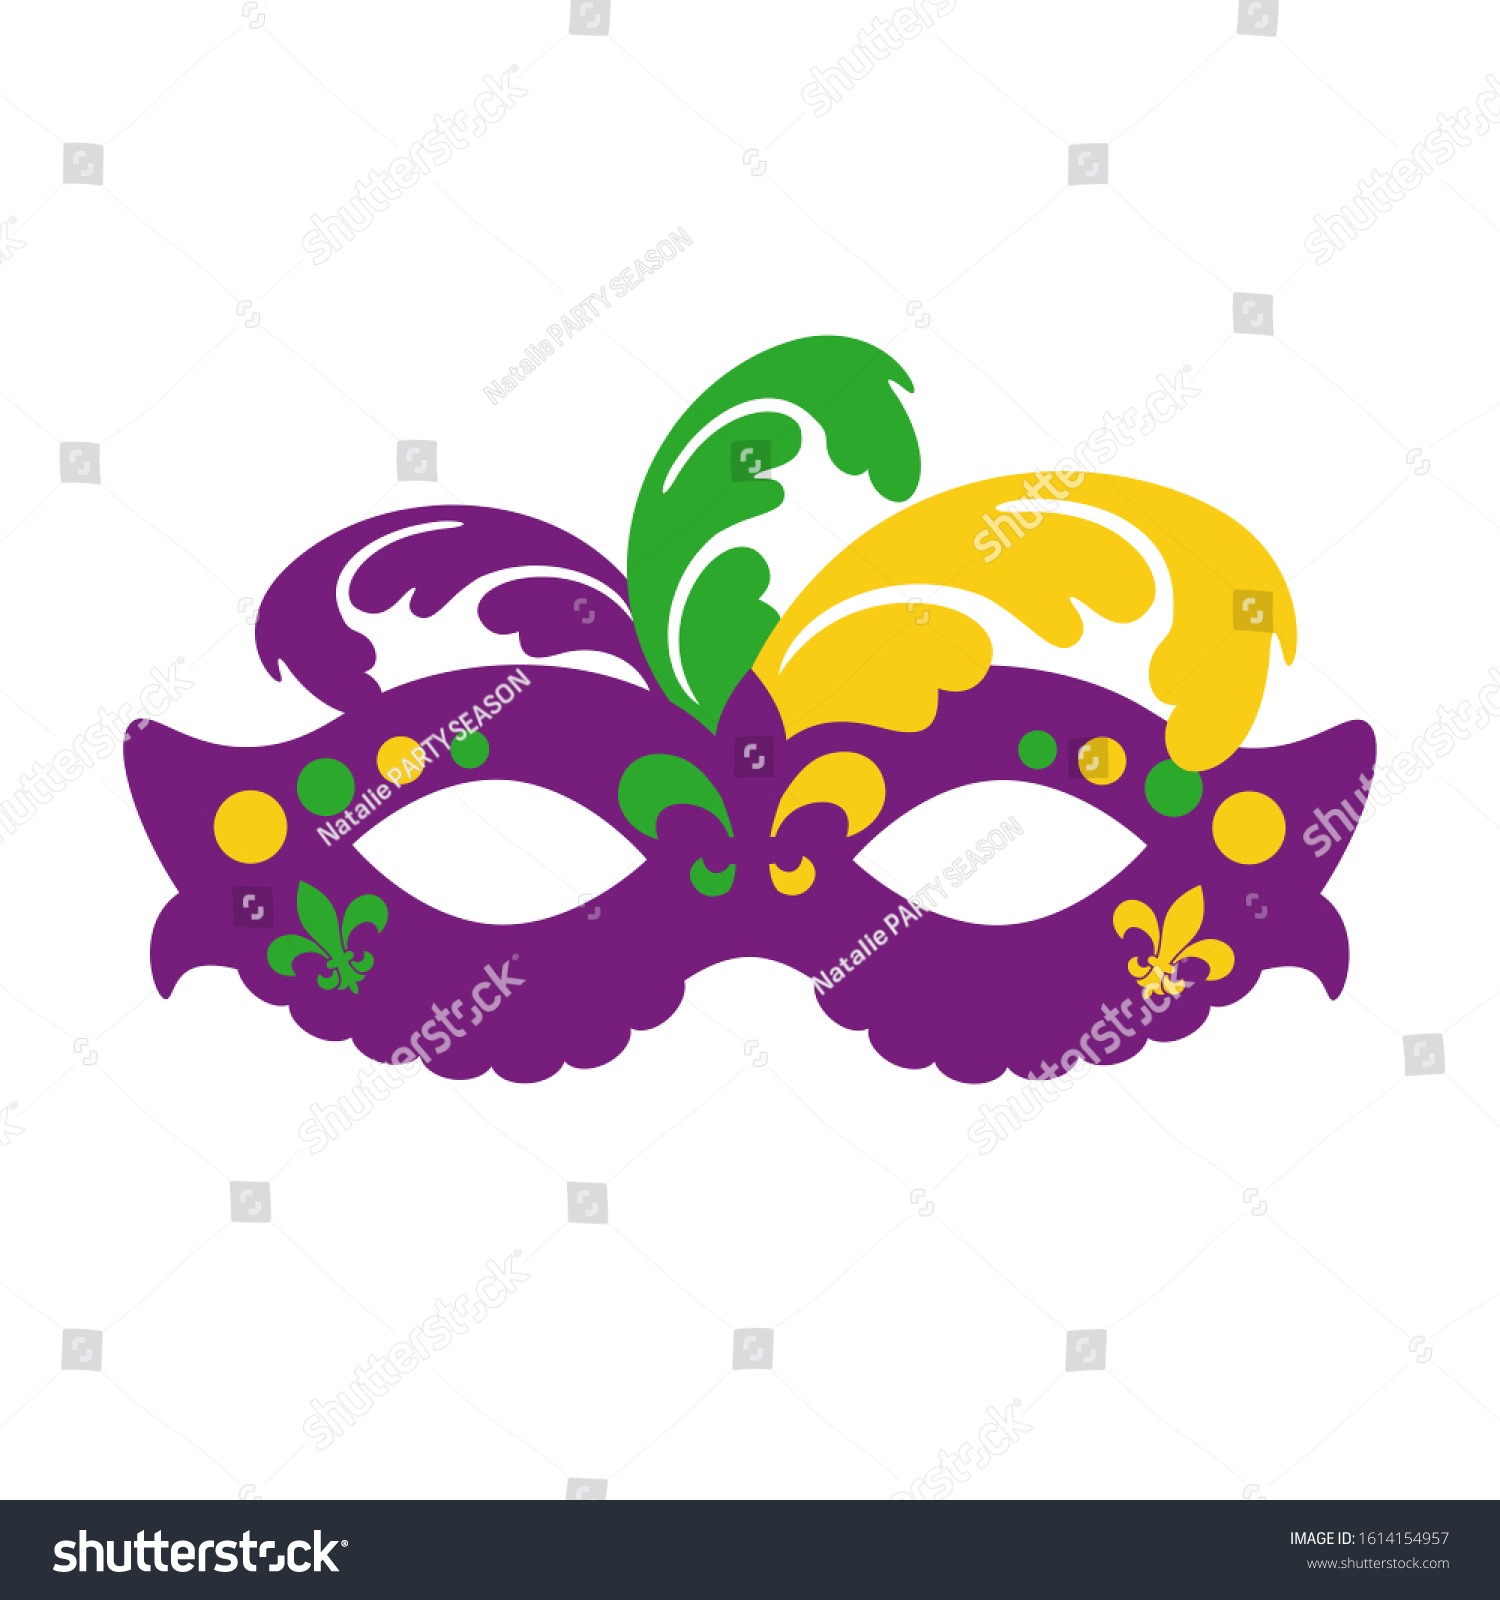 Download Mask Mardi Gras Svg Clipart Fat Stock Vector Royalty Free 1614154957